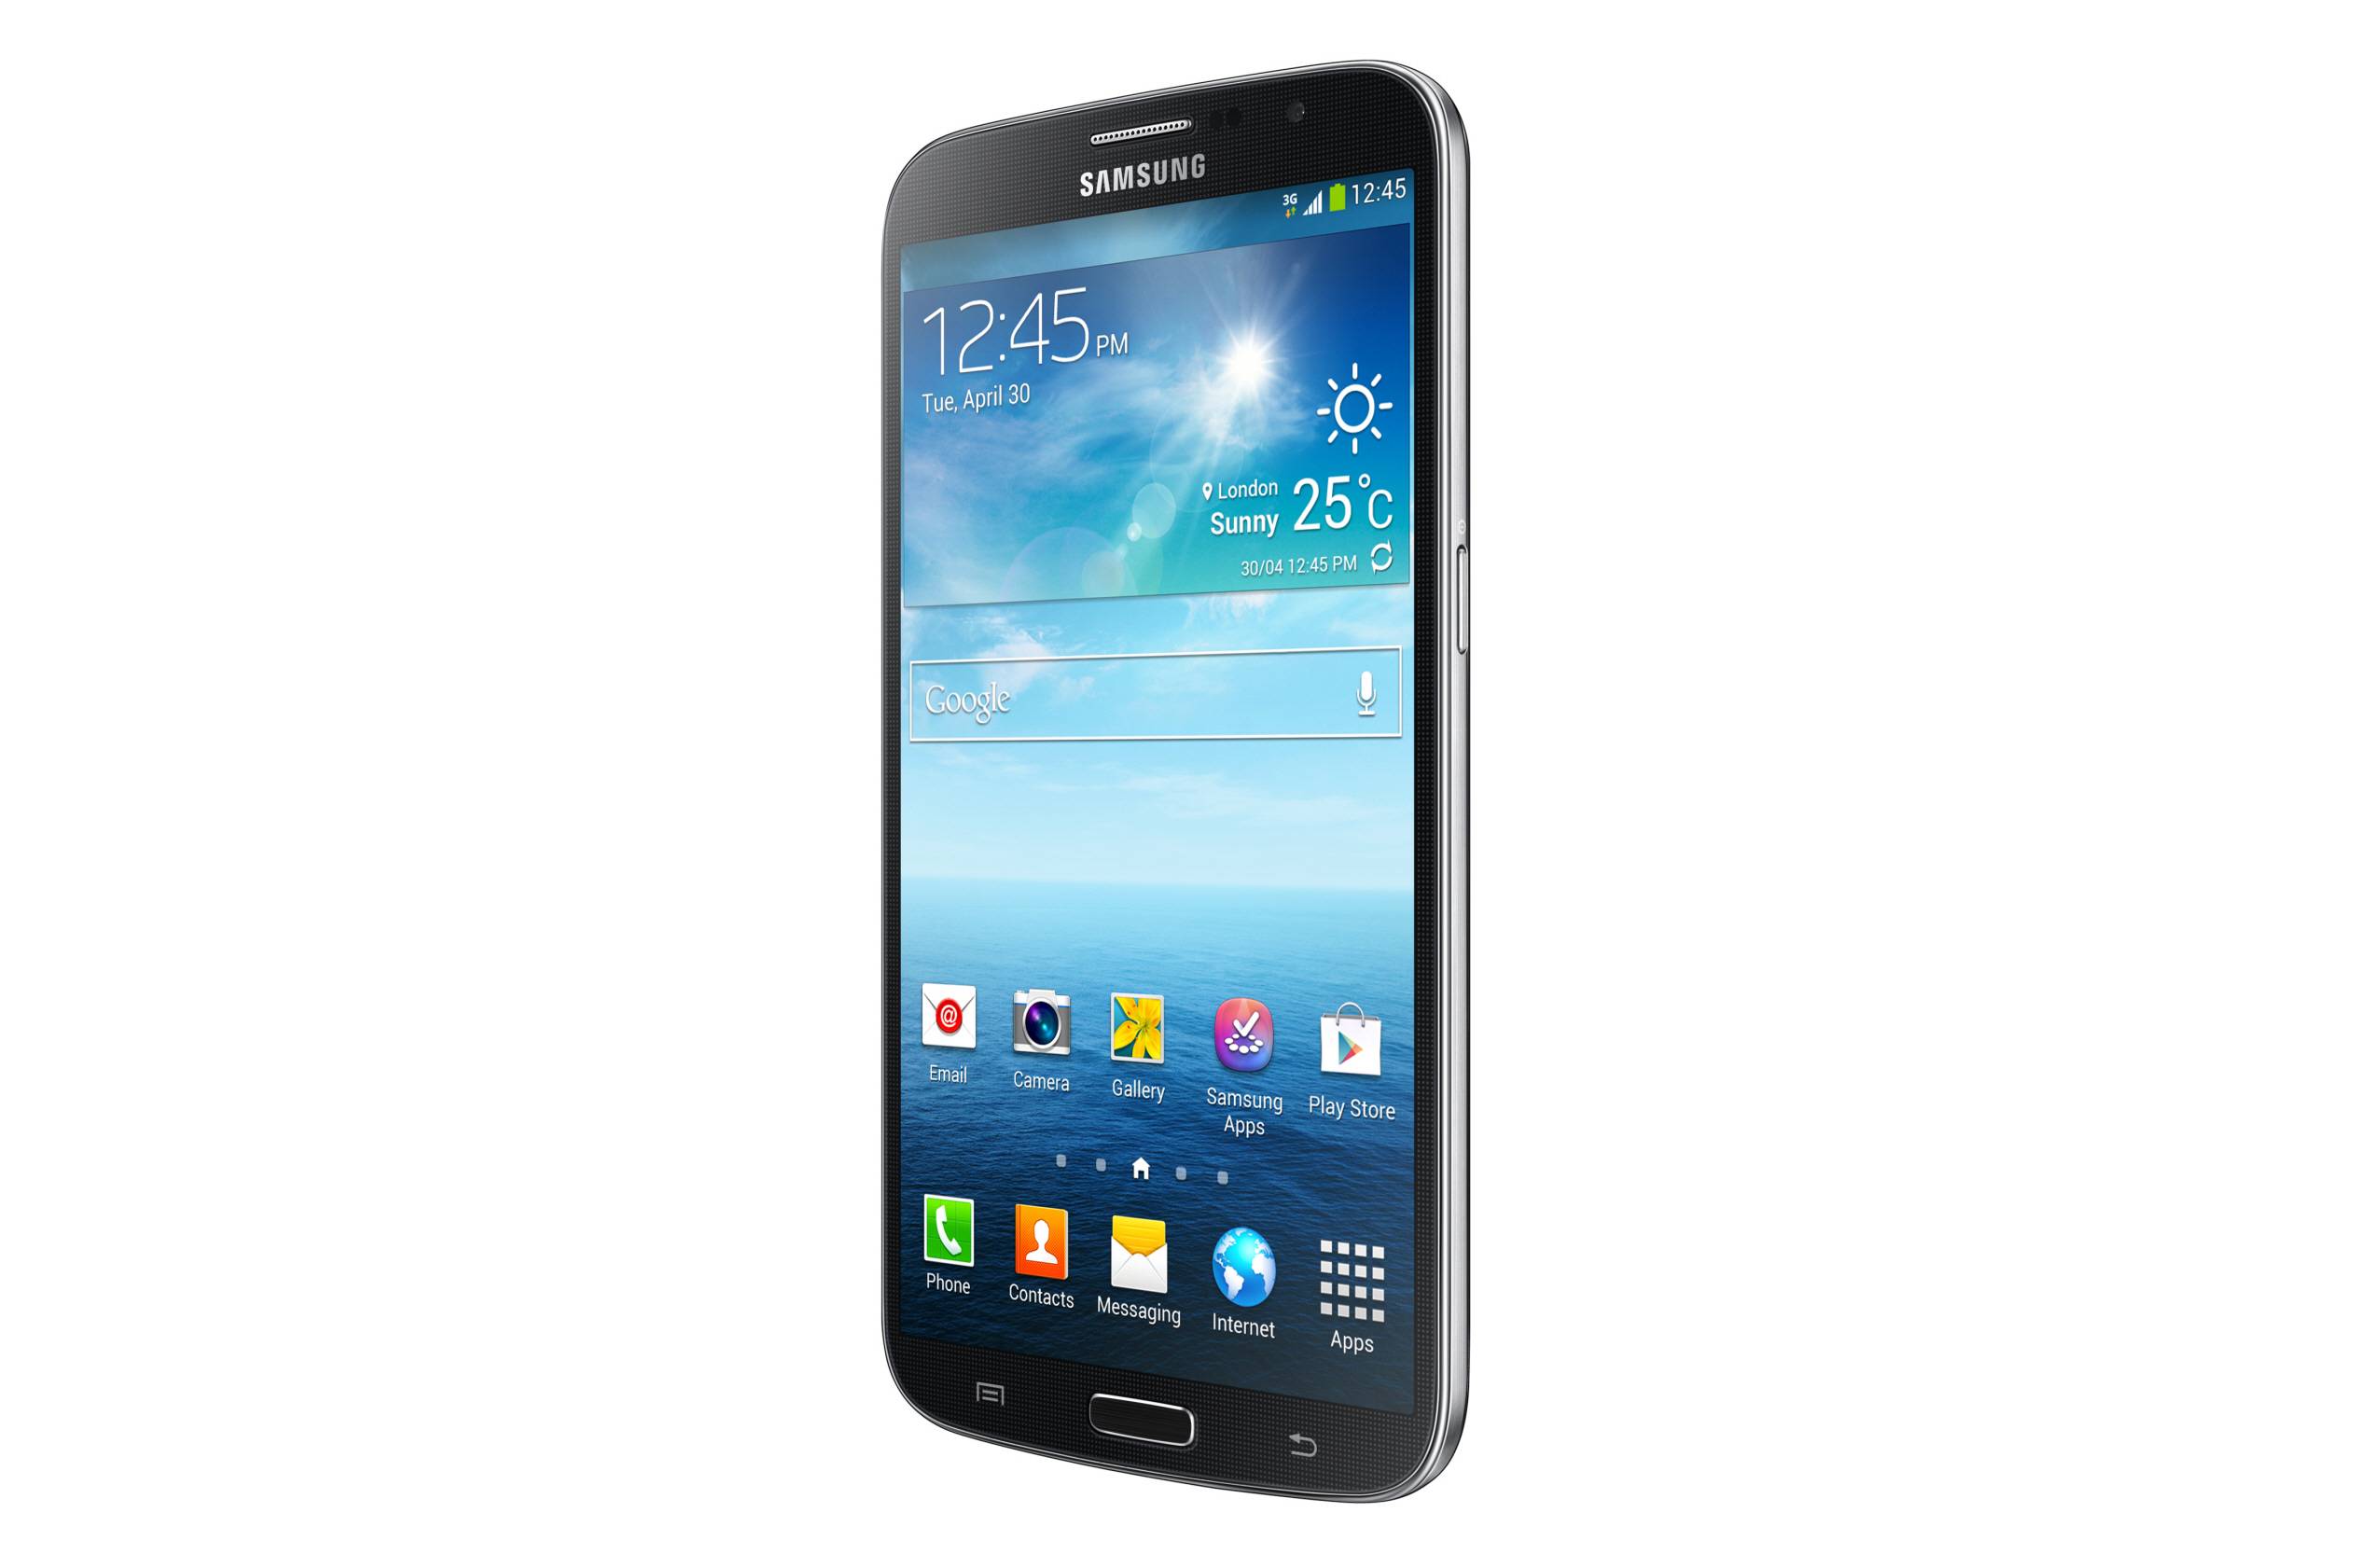 Samsung Galaxy Mega 6.3 heading to US carriers later this month